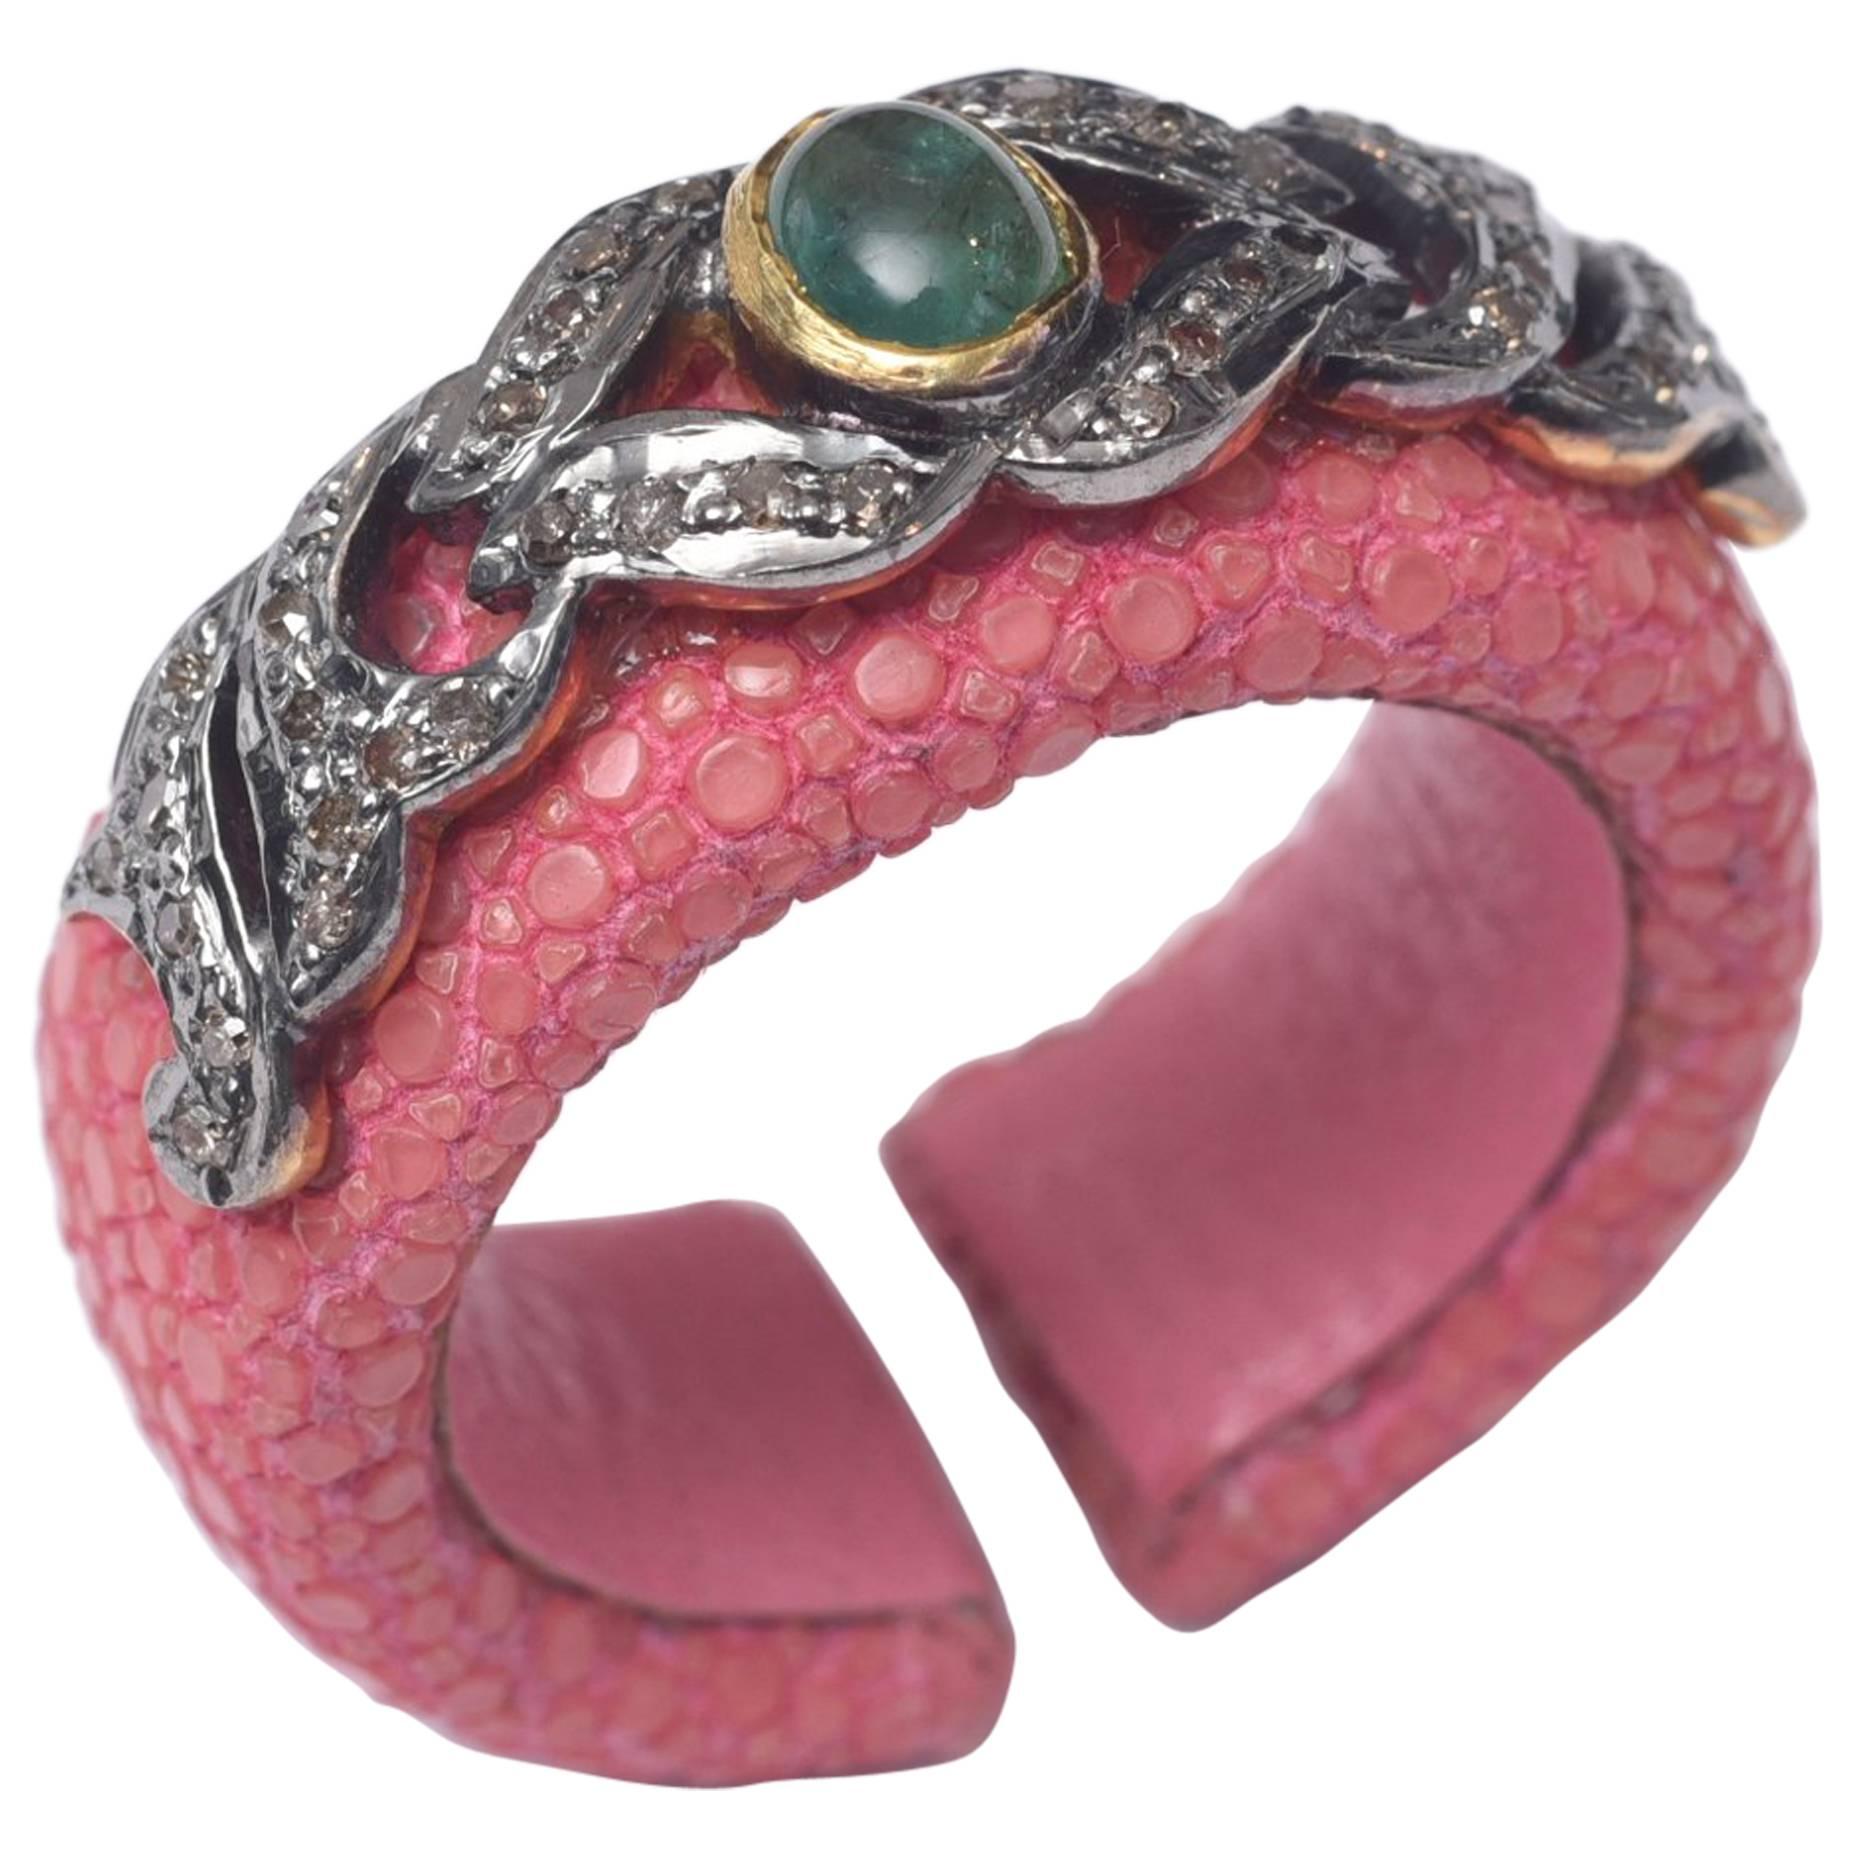 Diamonds and Emerald on Pink Shagreen ‘Sting Ray’ Ring